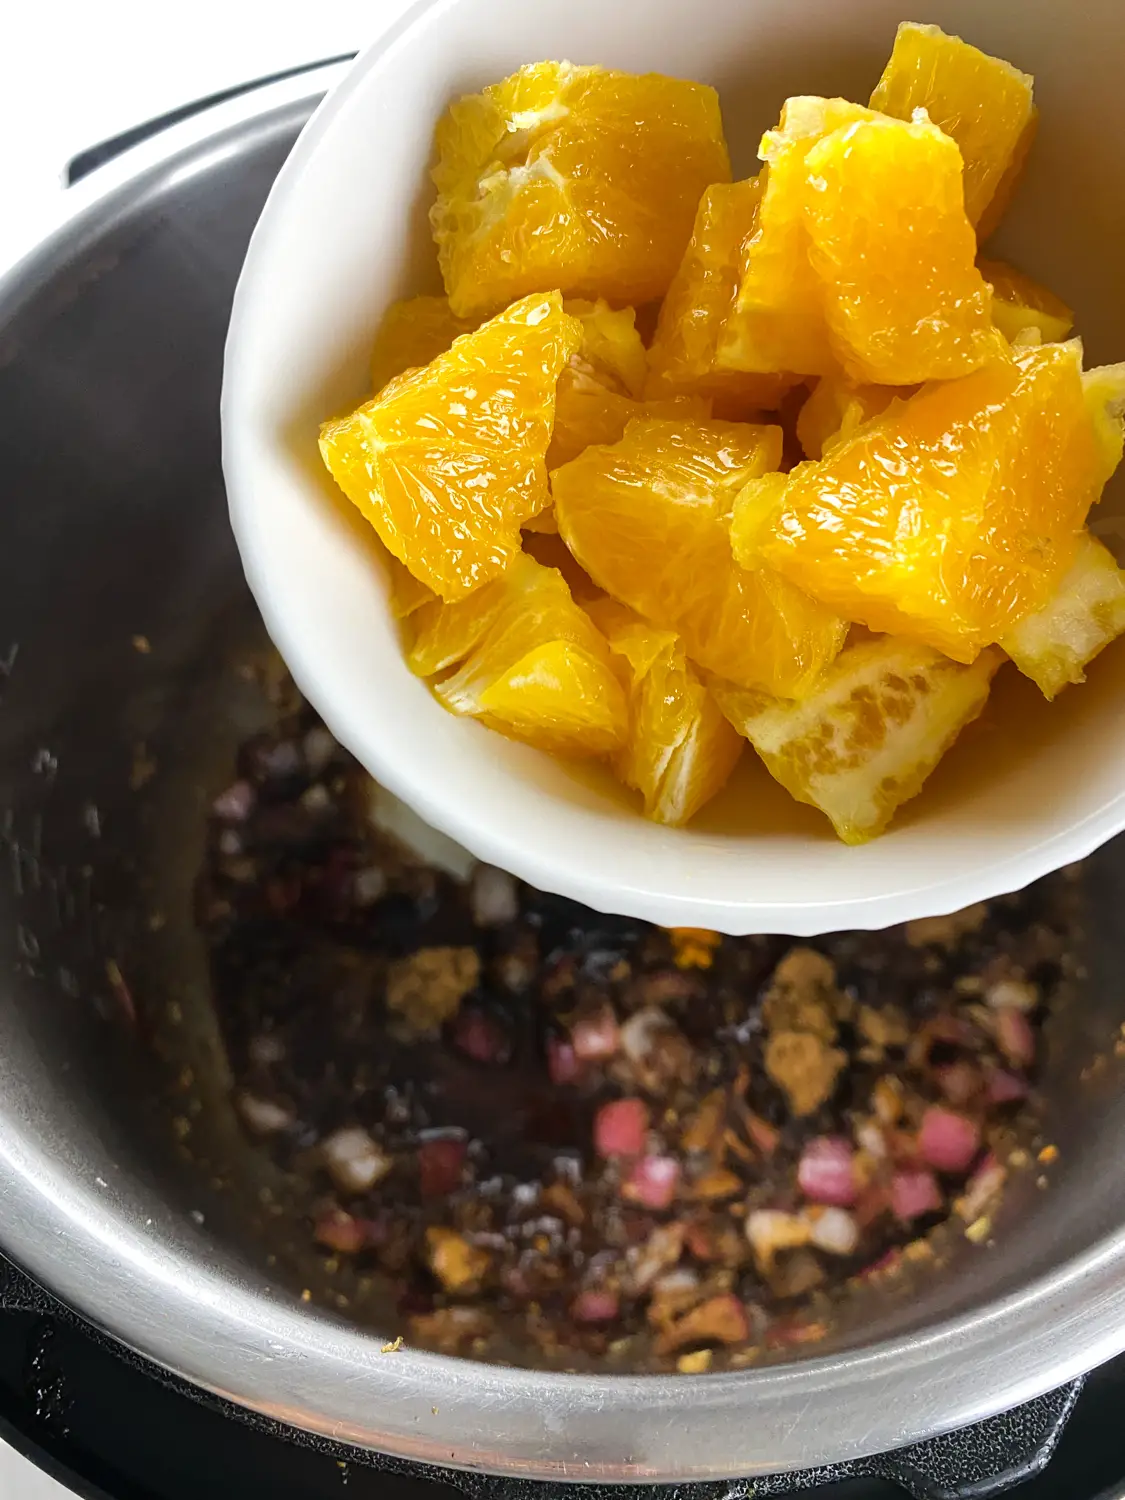 Fill the Instant Pot™ with the brown sugar, orange zest, orange pieces, and cherries.